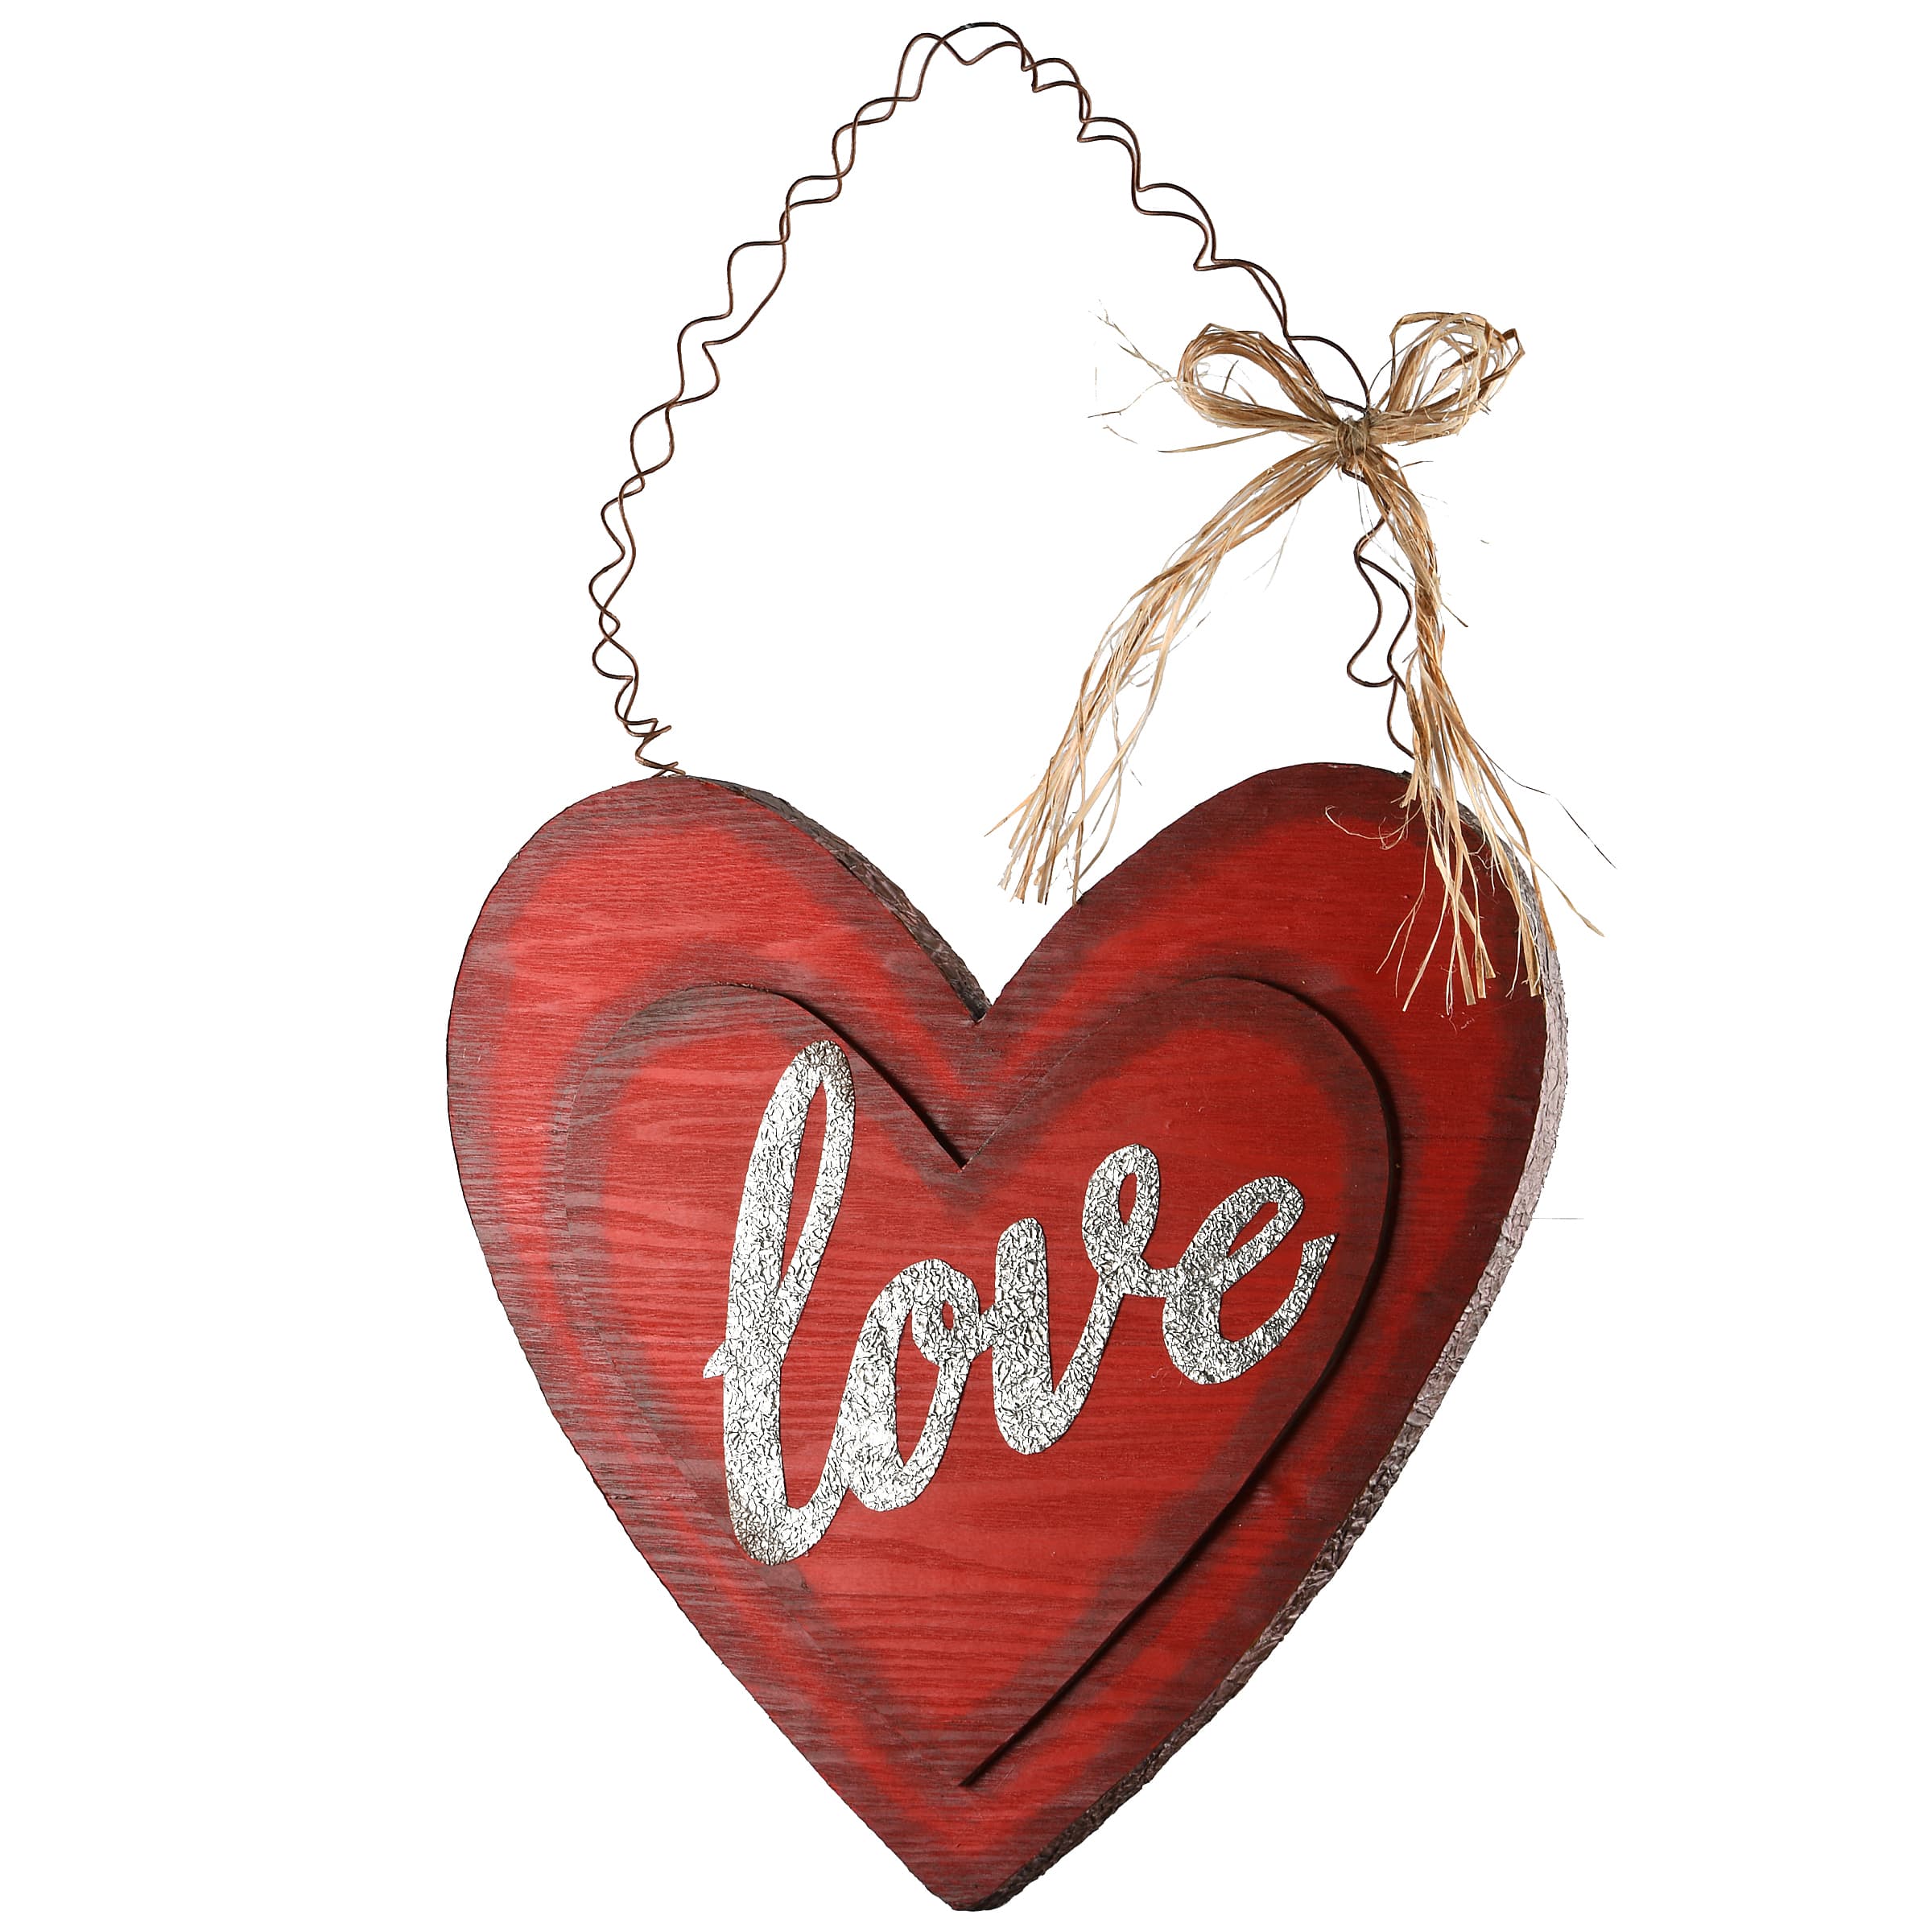 Valentine's Day Wood Heart Shaped Ornaments Wood Heart Ornaments Wooden  Love Heart Embellishments with Twine for Valentine's Day Wedding Party  Decor